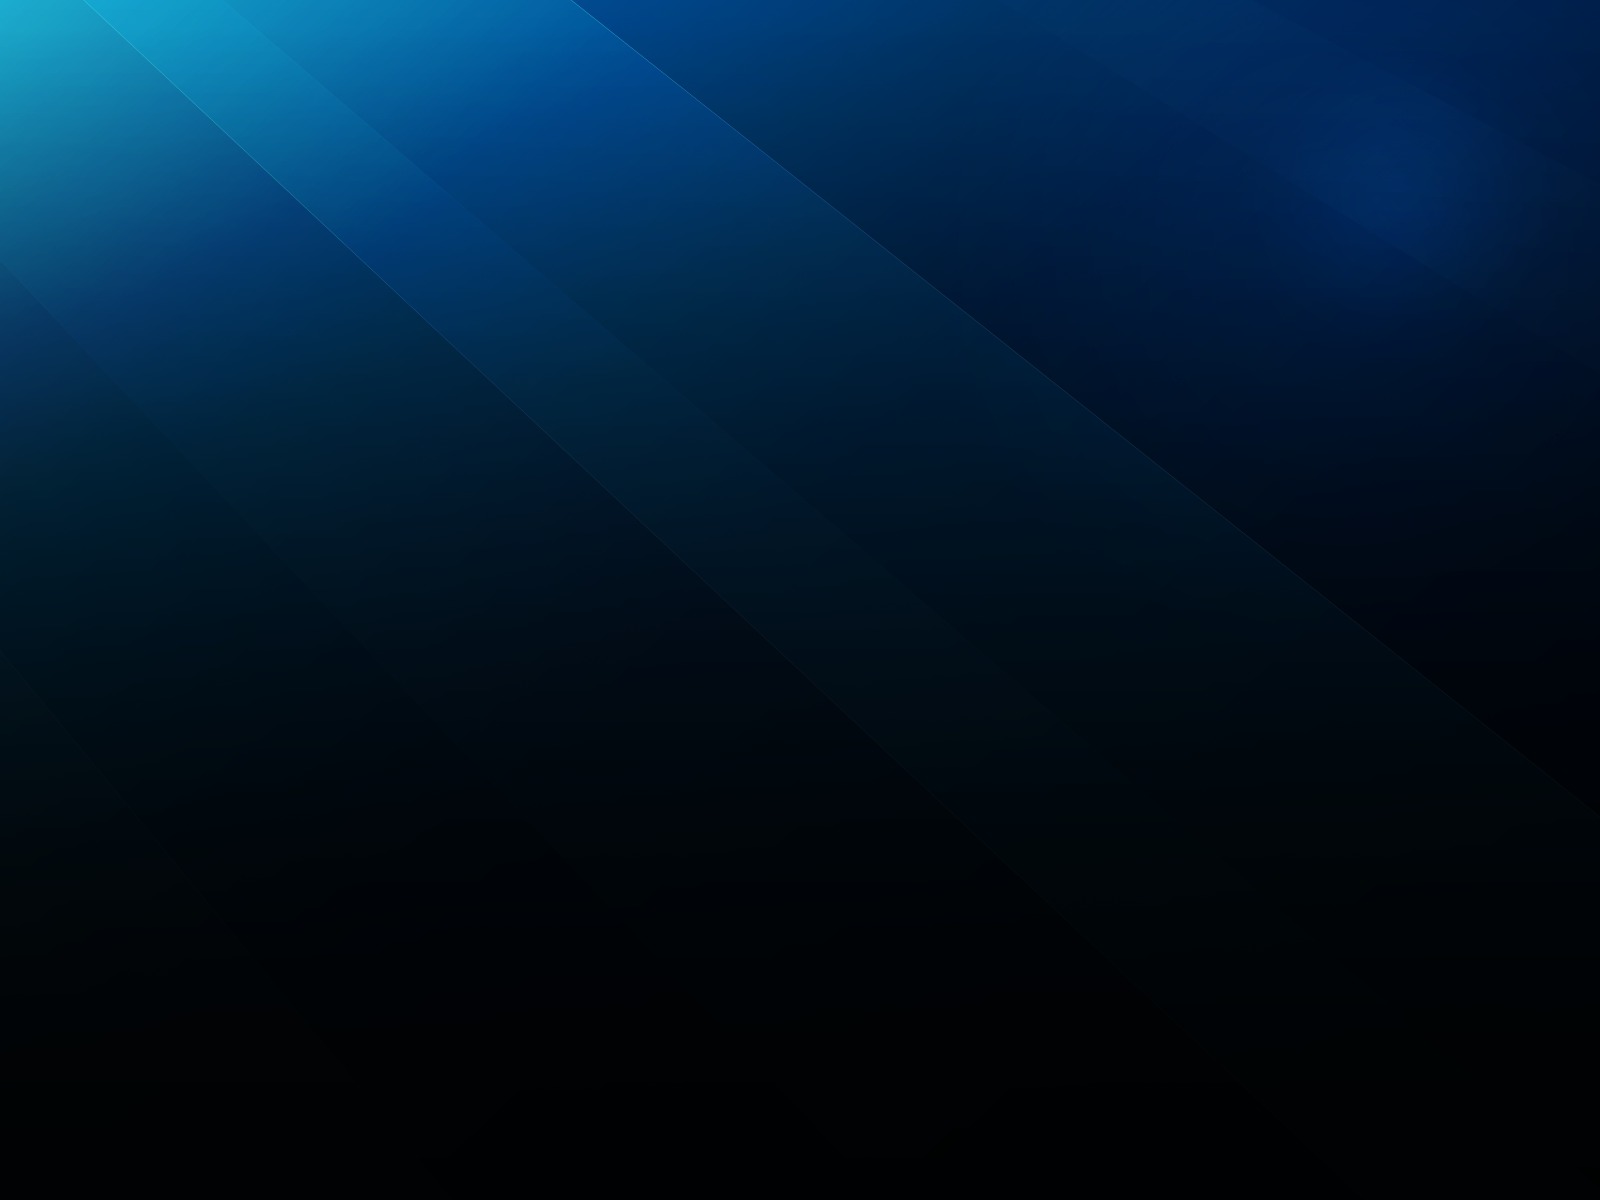 Awesome Blue Backgrounds - WallpaperSafari